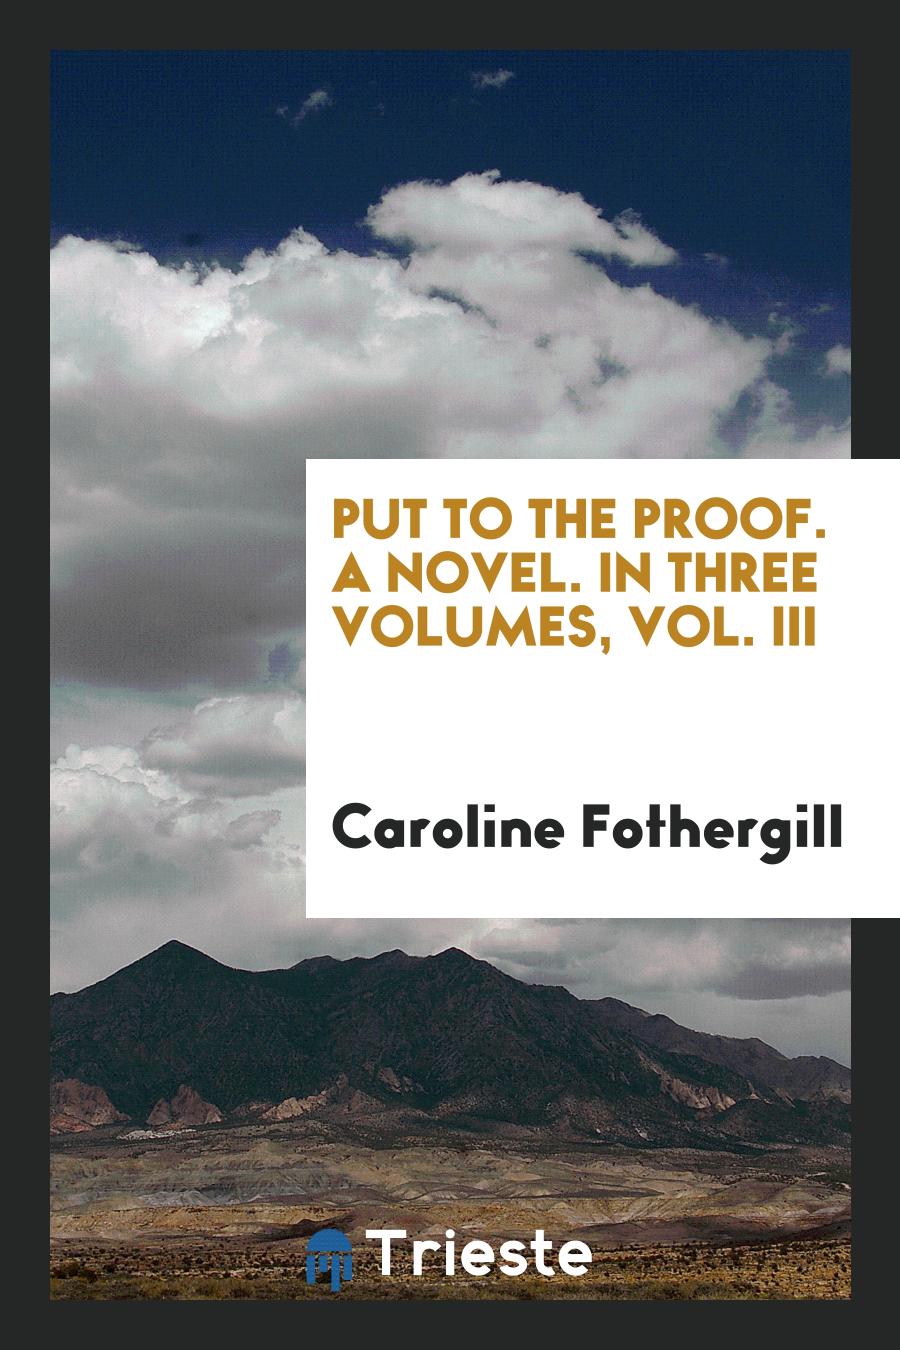 Put to the Proof. A Novel. In Three Volumes, Vol. III